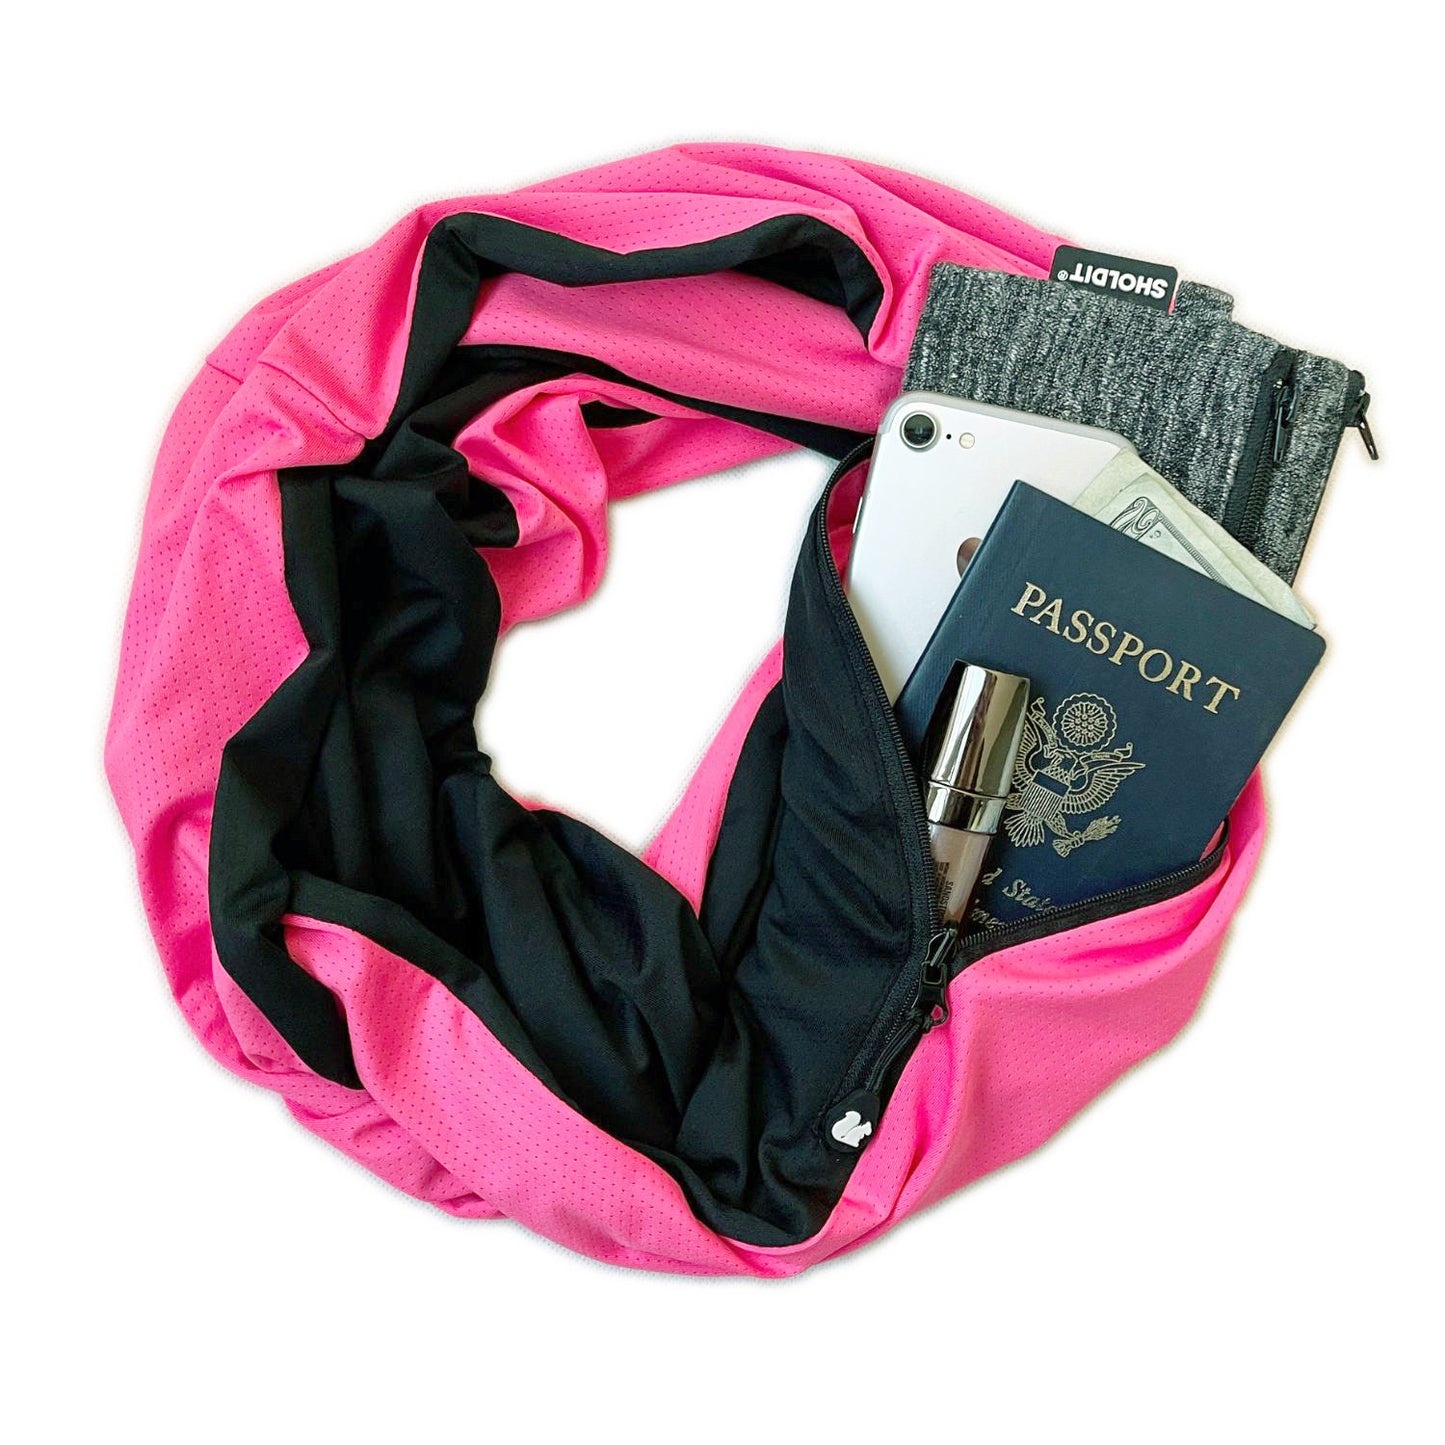 SHOLDIT Convertible Infinity Scarf with Pocket Pink Twist with items in pocket